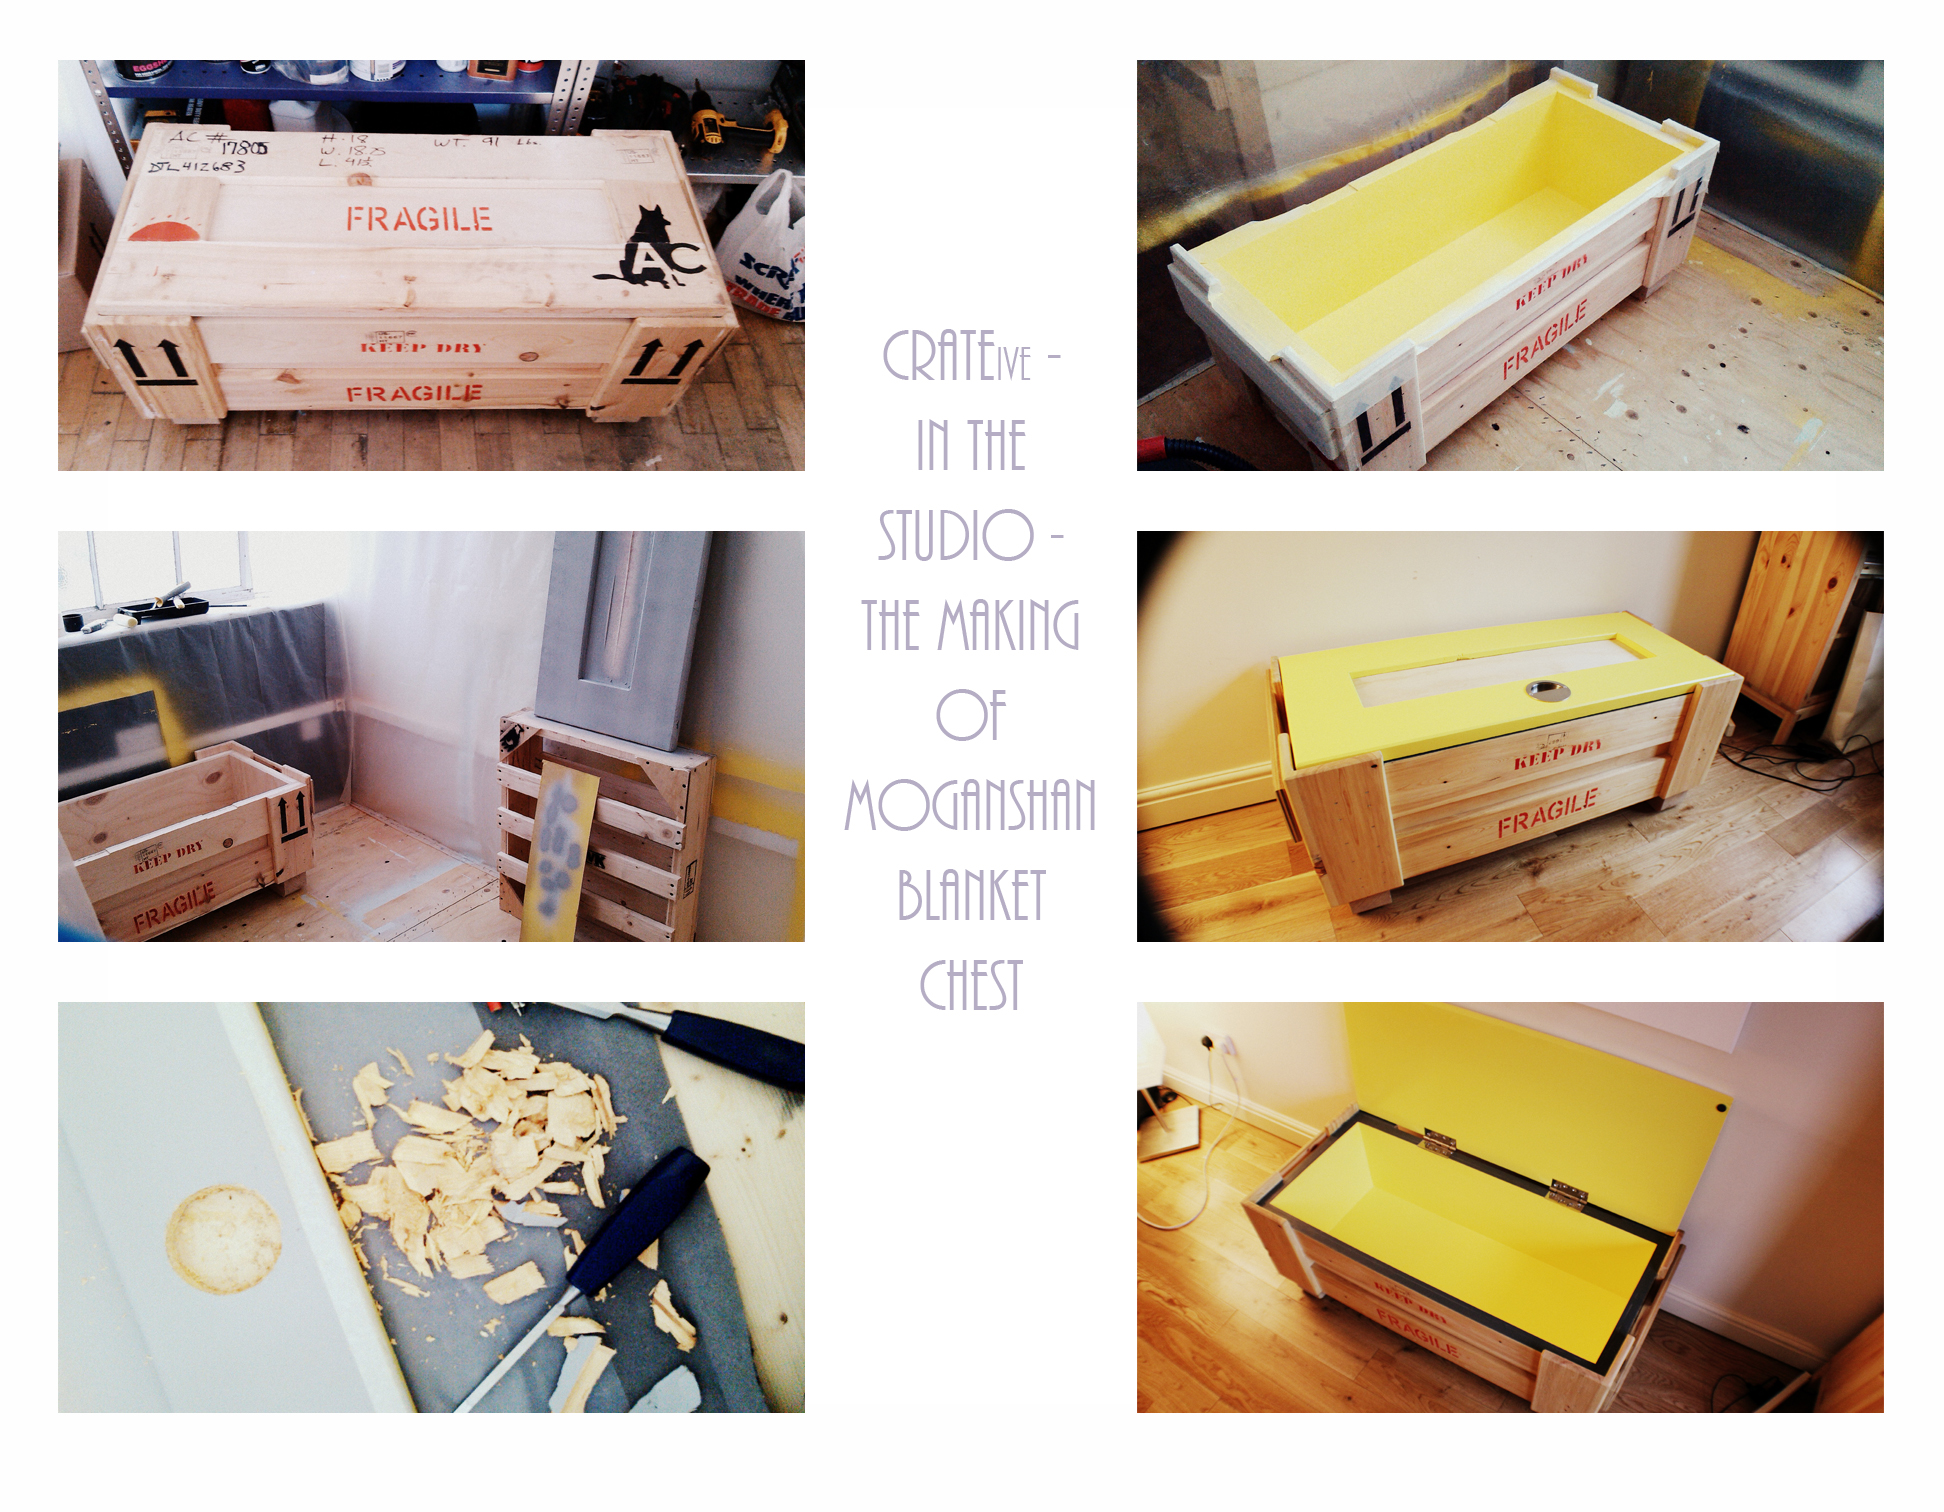 CRATEive - In the studio - The making of Moganshan Blanket Chest